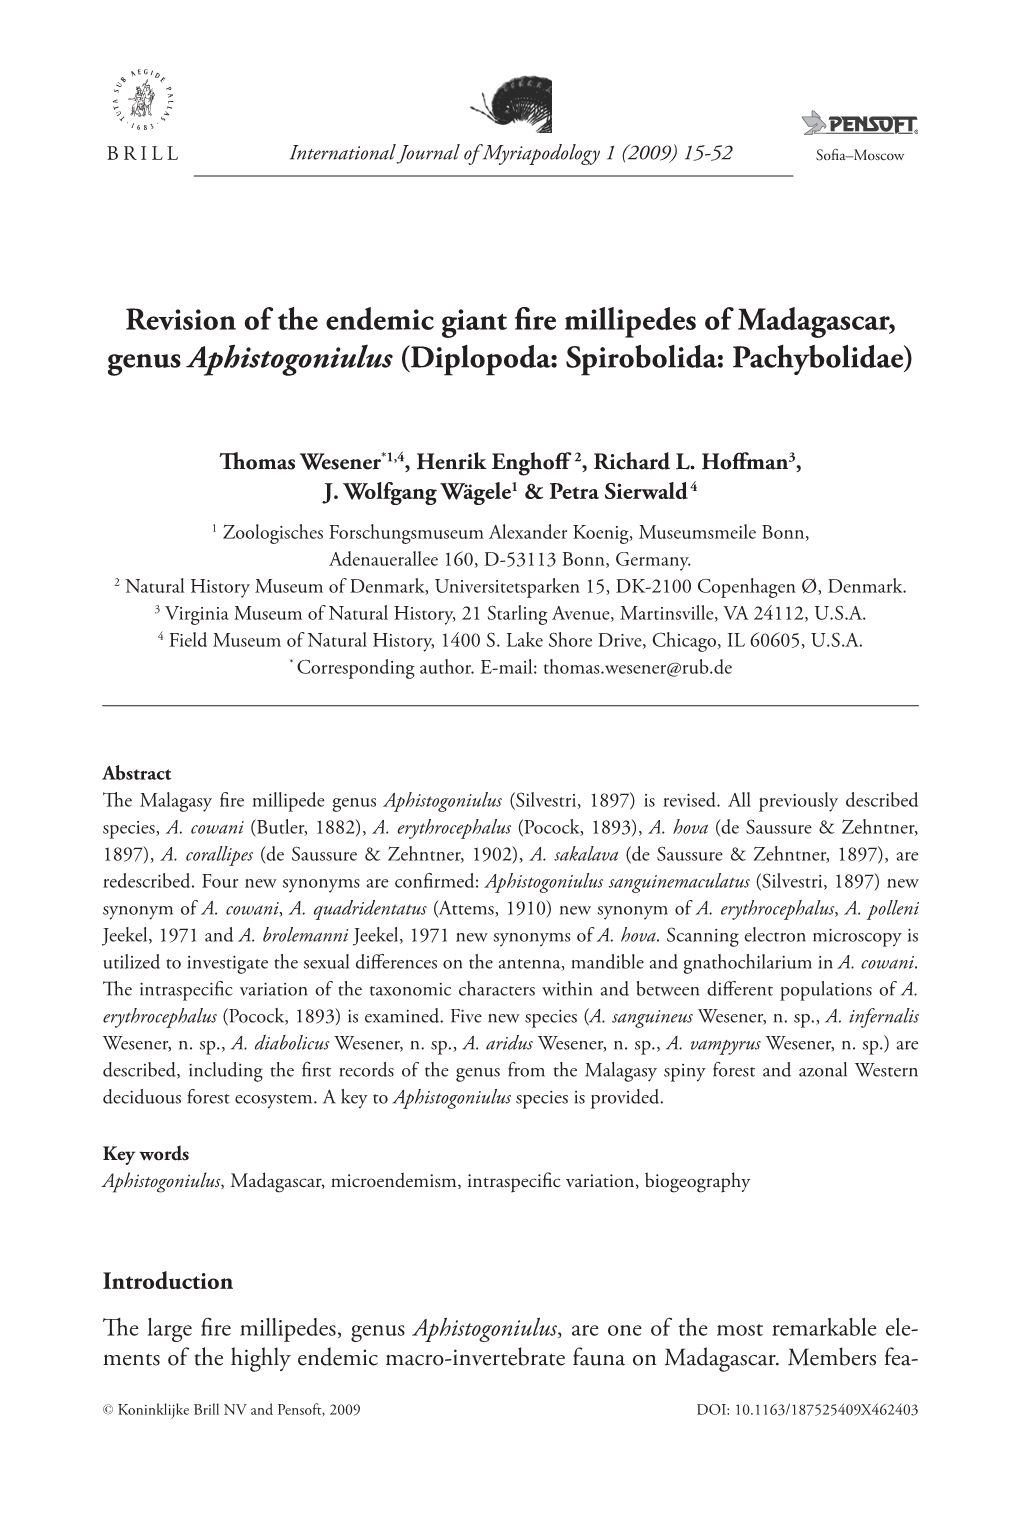 Revision of the Endemic Giant Fire Millipedes of Madagascar, Genus